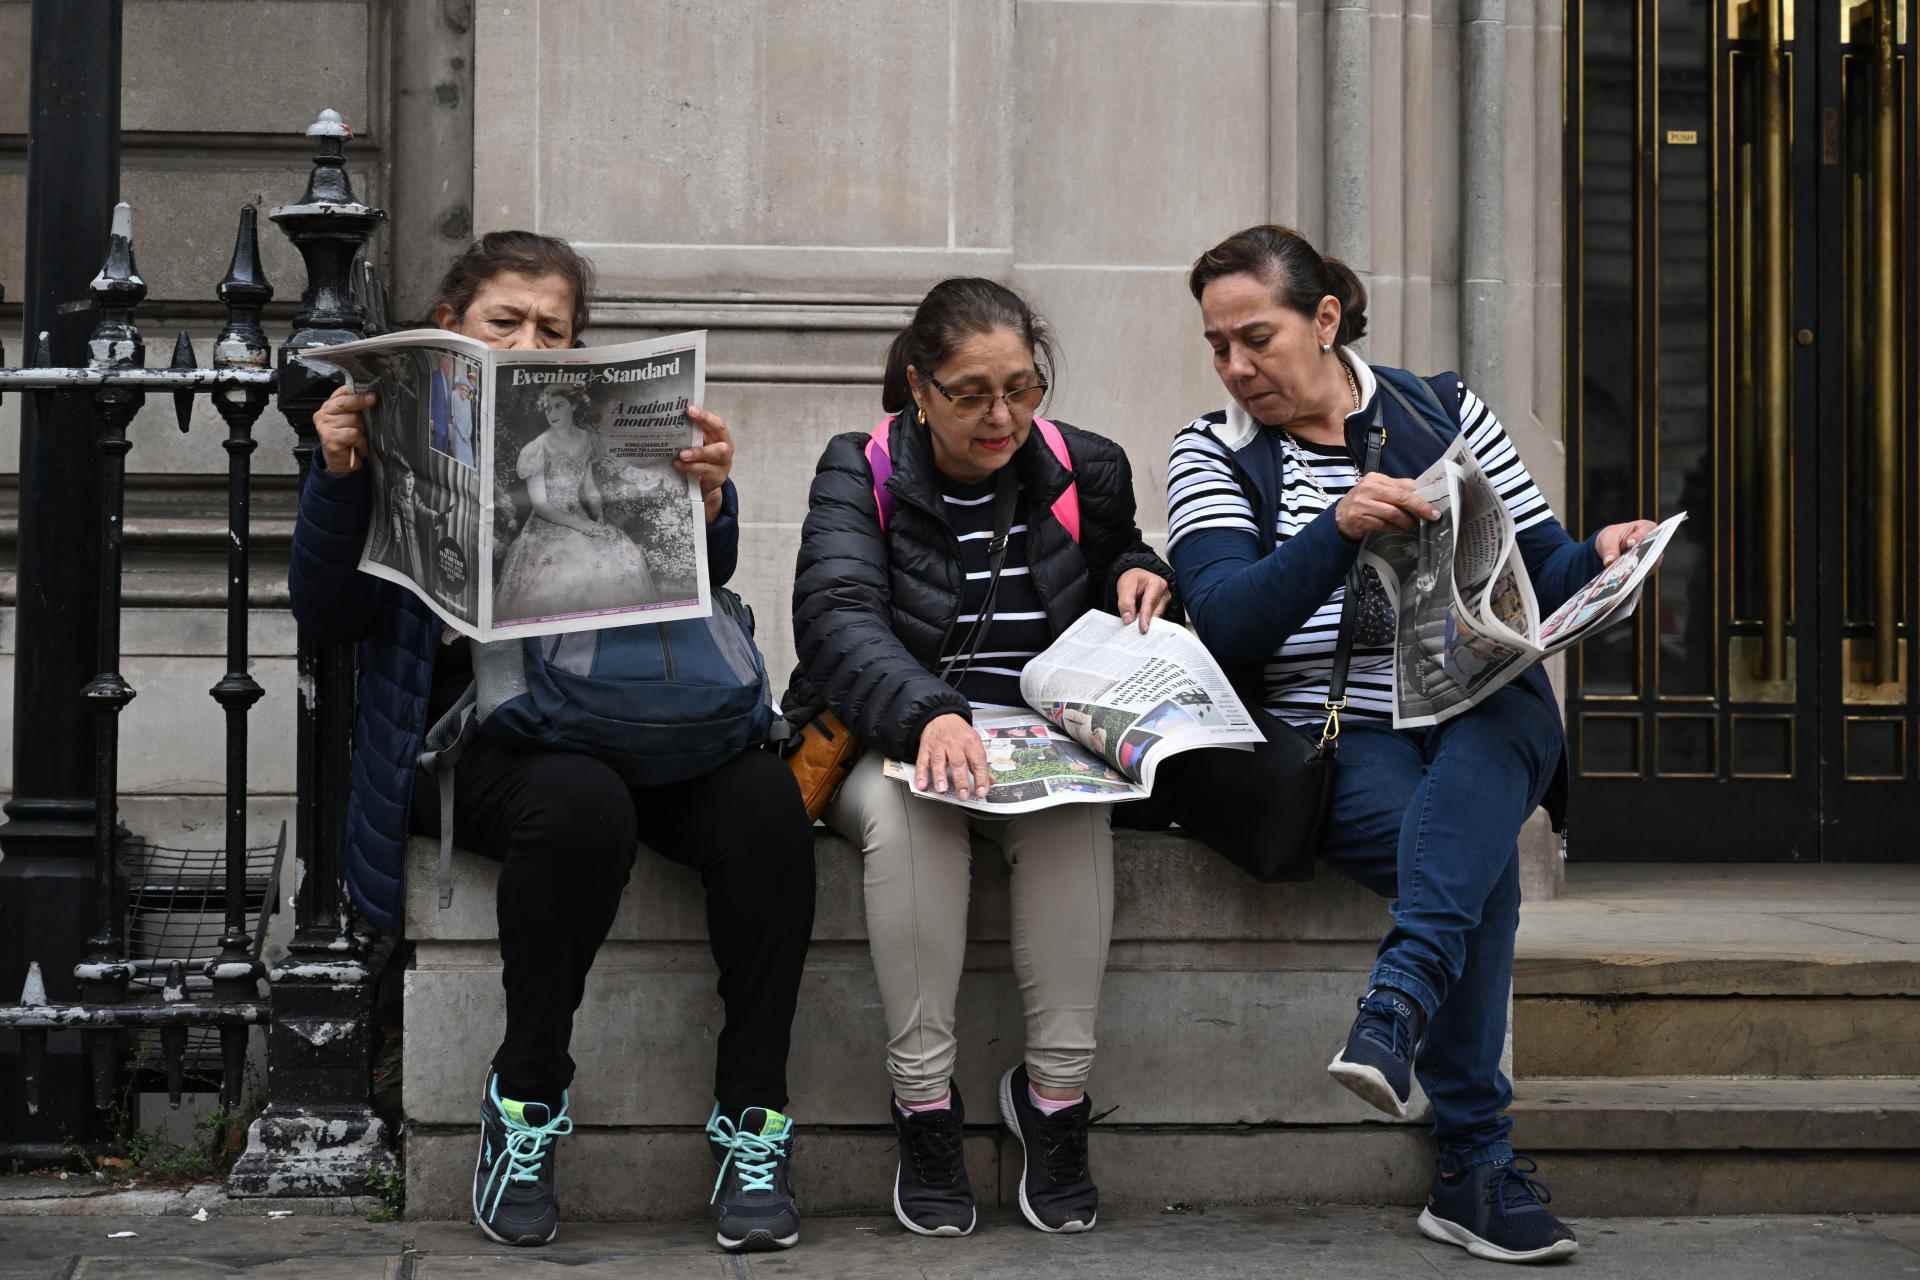 Three tourists read a free London newspaper, 'The Evening Standard', in central London on September 9, 2022.